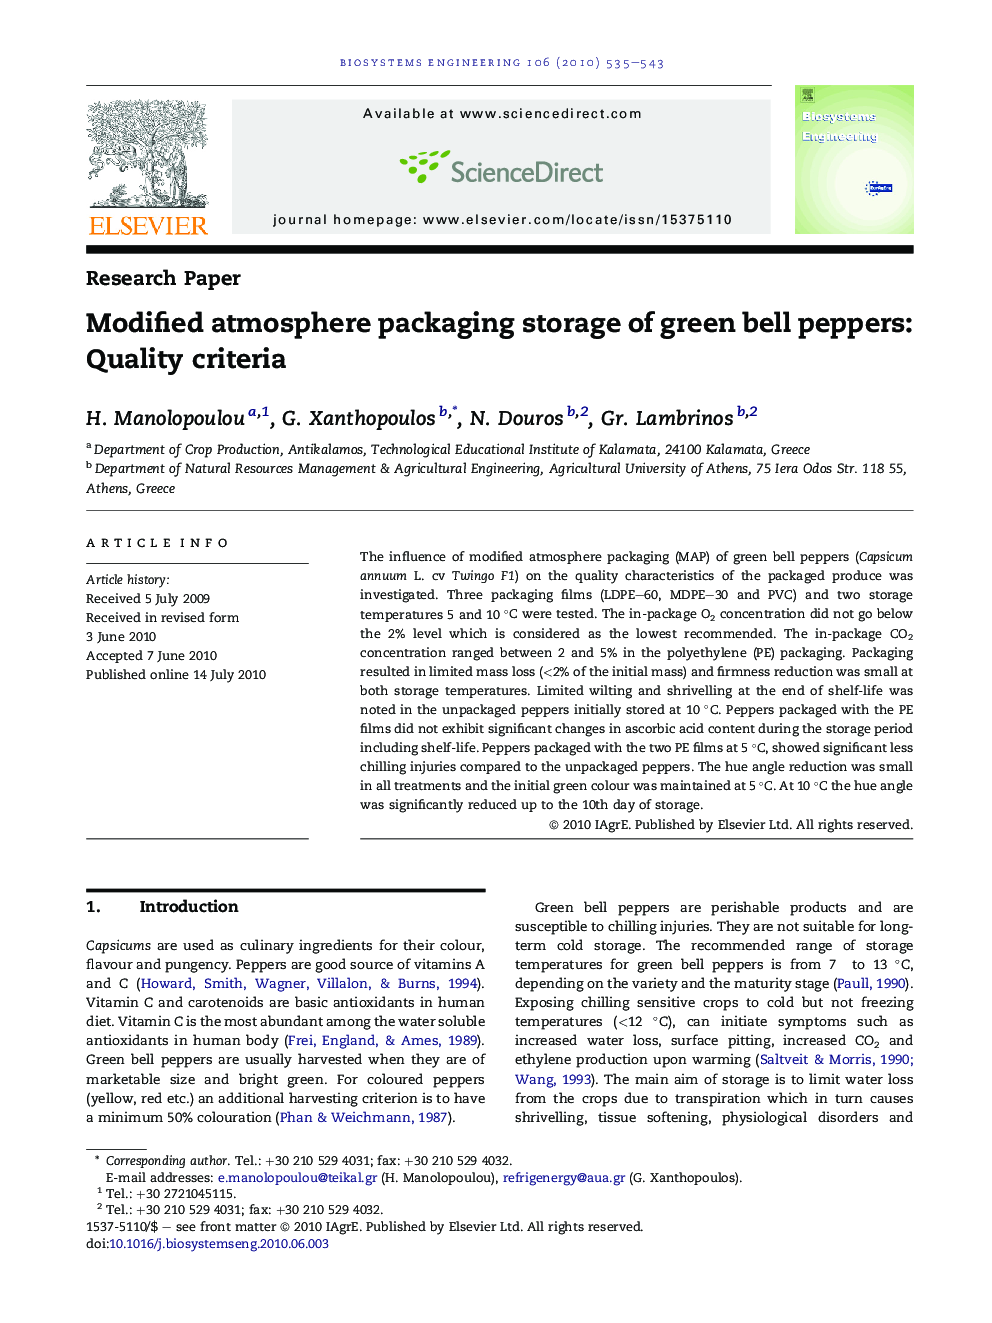 Modified atmosphere packaging storage of green bell peppers: Quality criteria